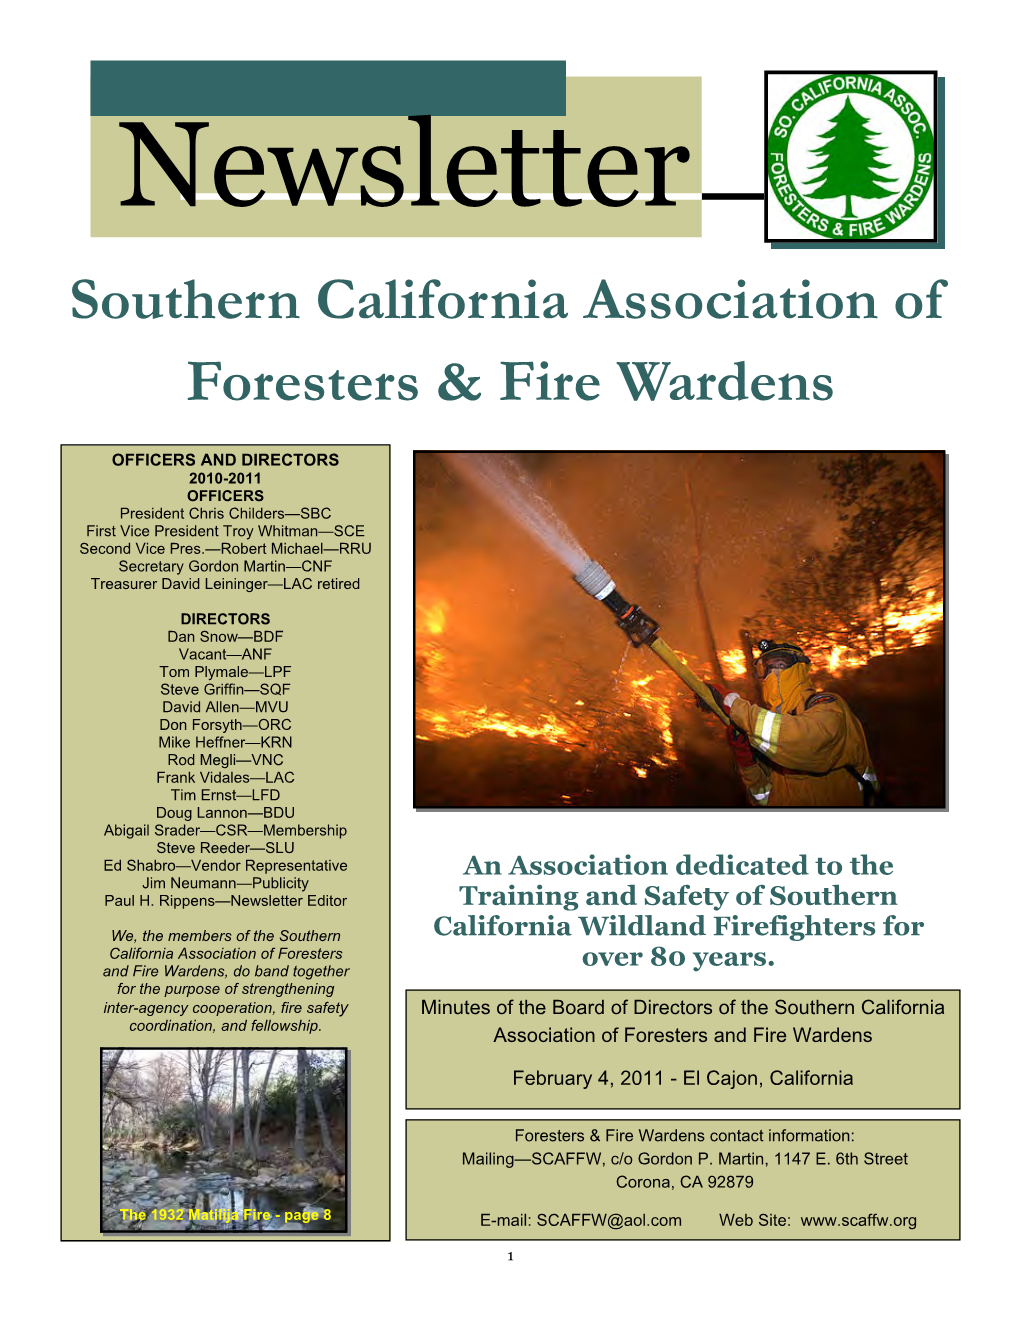 Southern California Association of Foresters & Fire Wardens